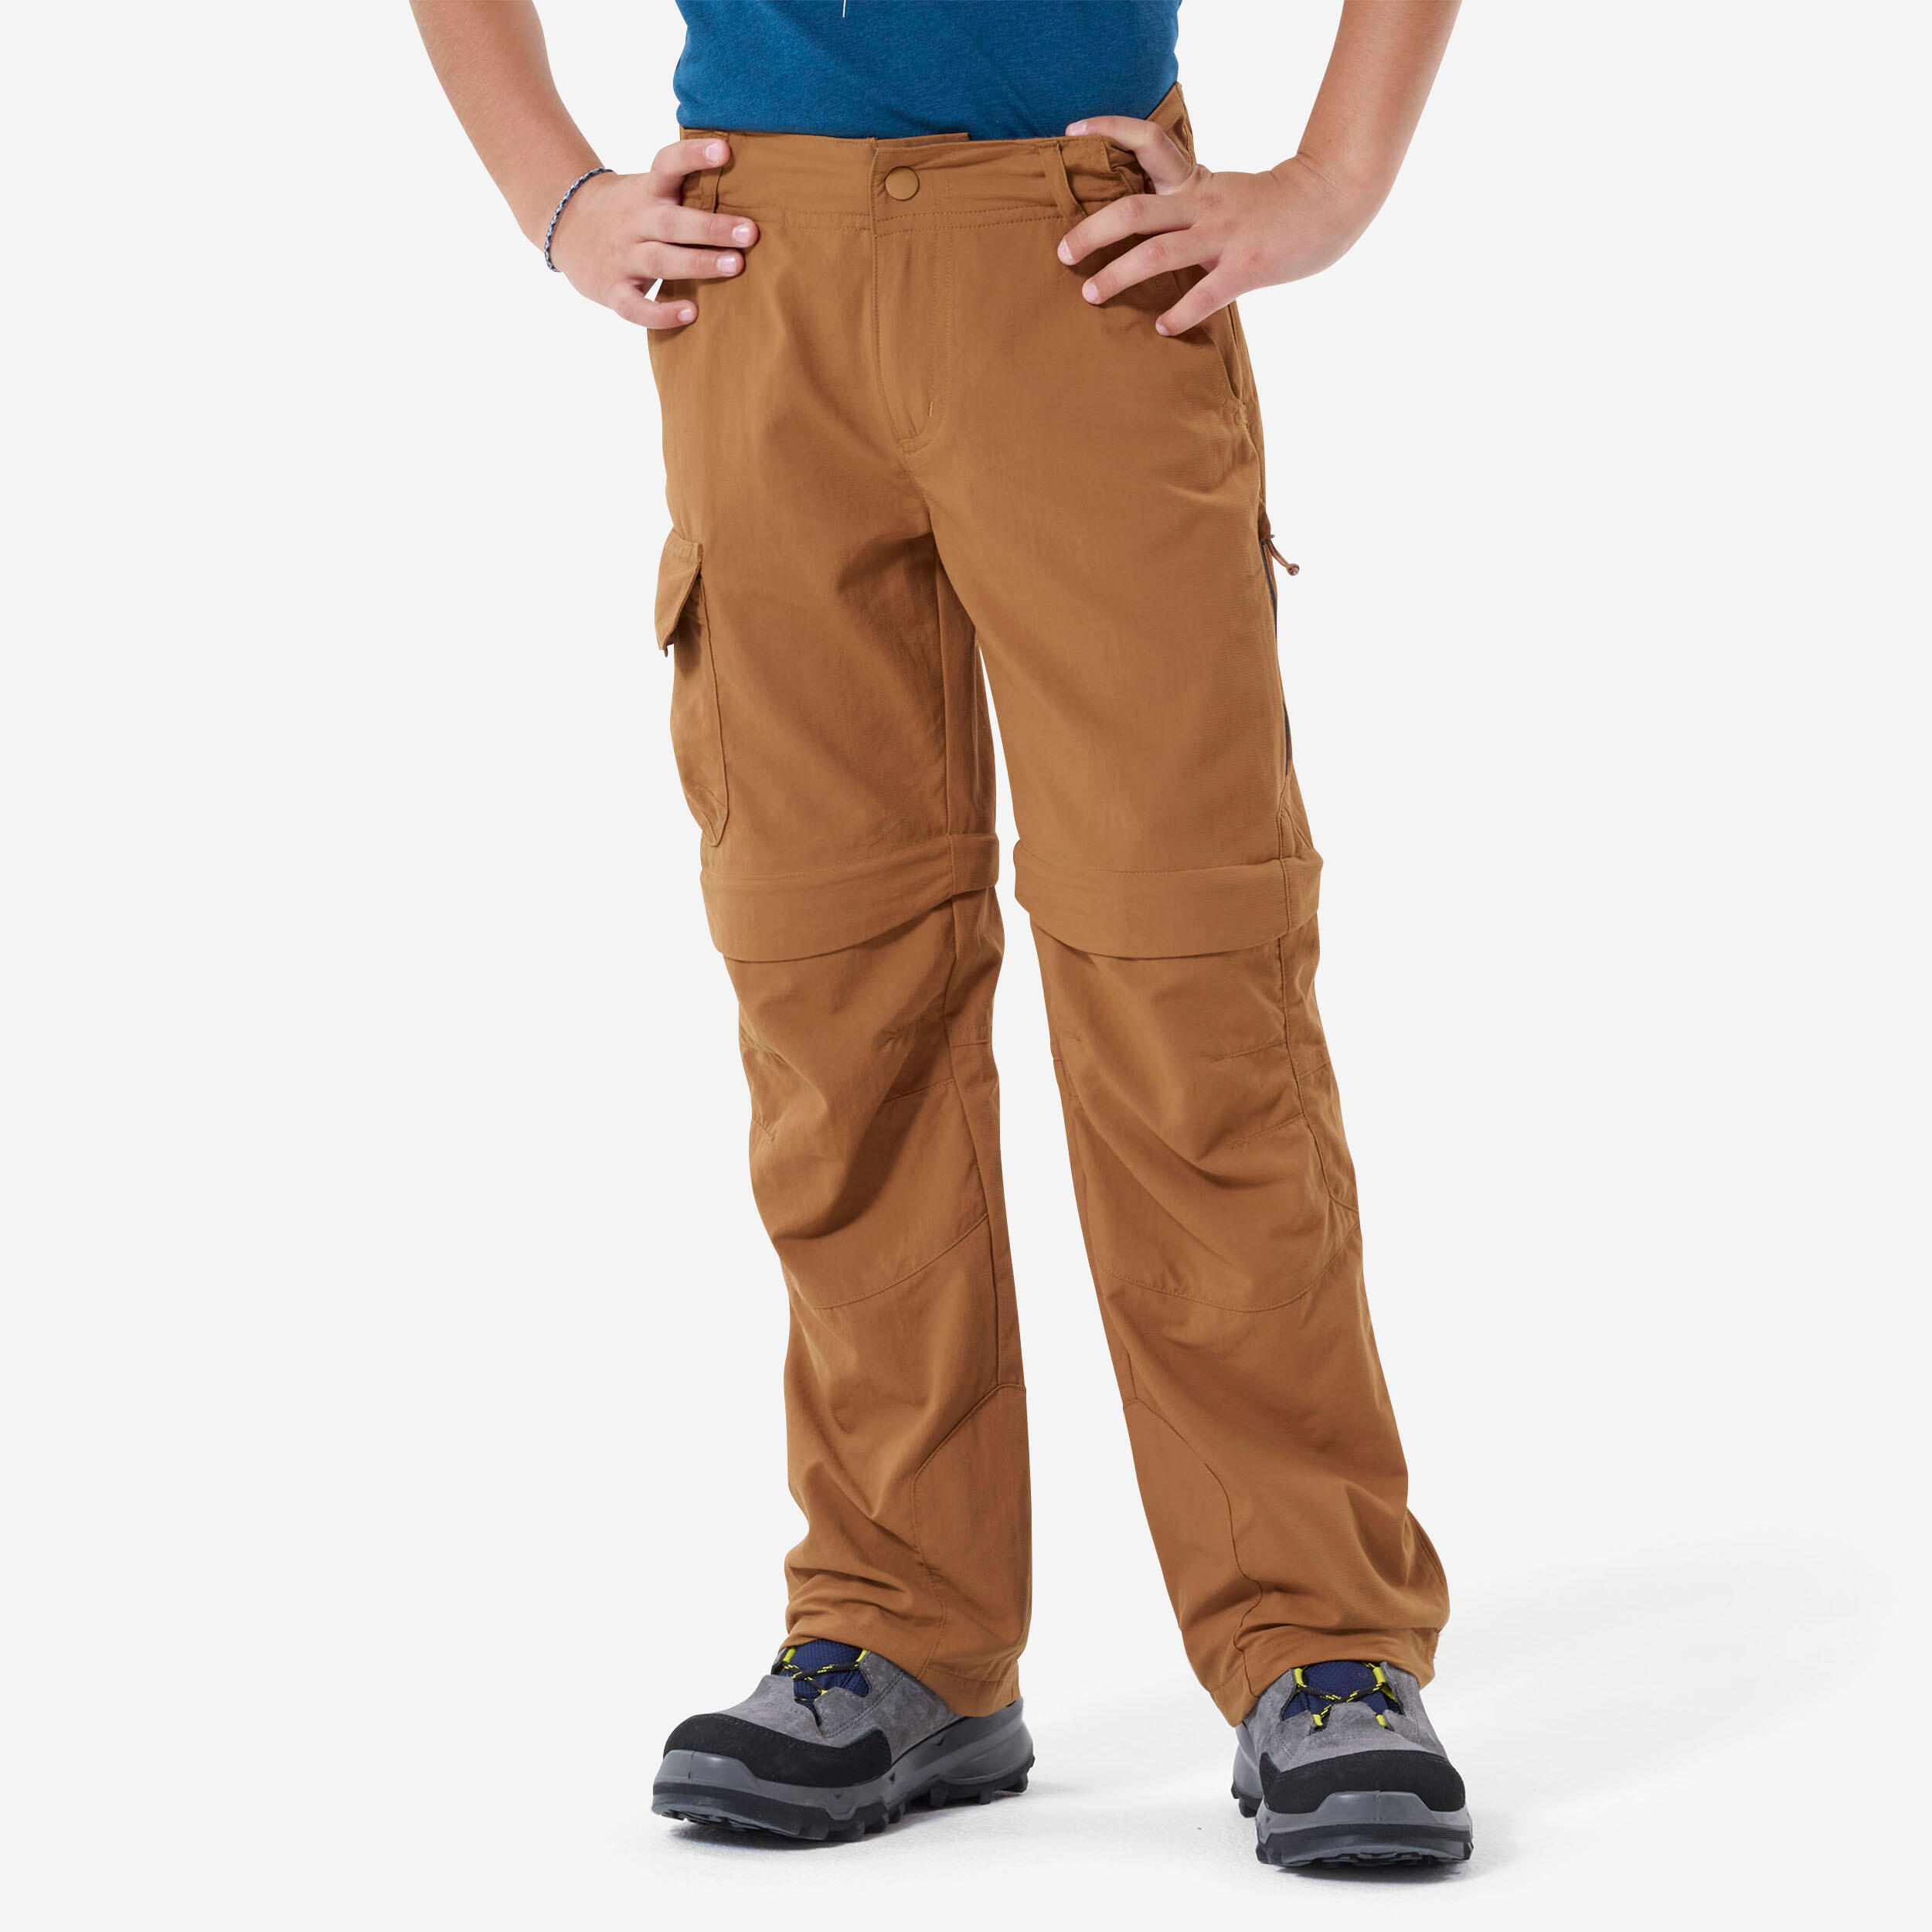 Womens cropped mountain walking trousers MH500 - Decathlon